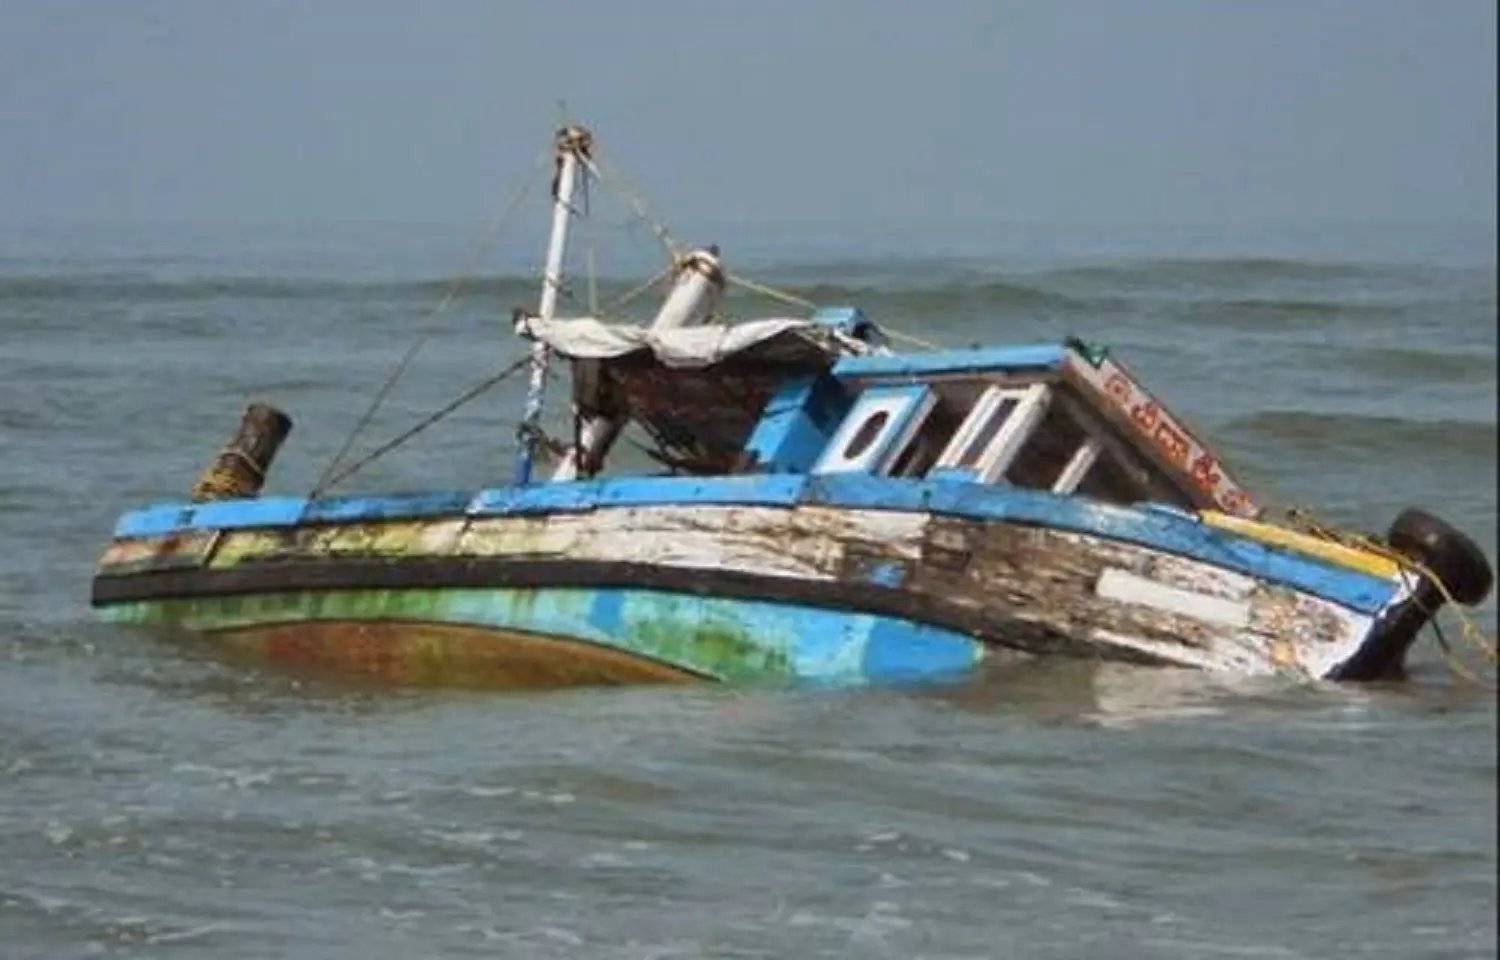 Kwara police confirm death of 106 wedding guests in a boat mishap